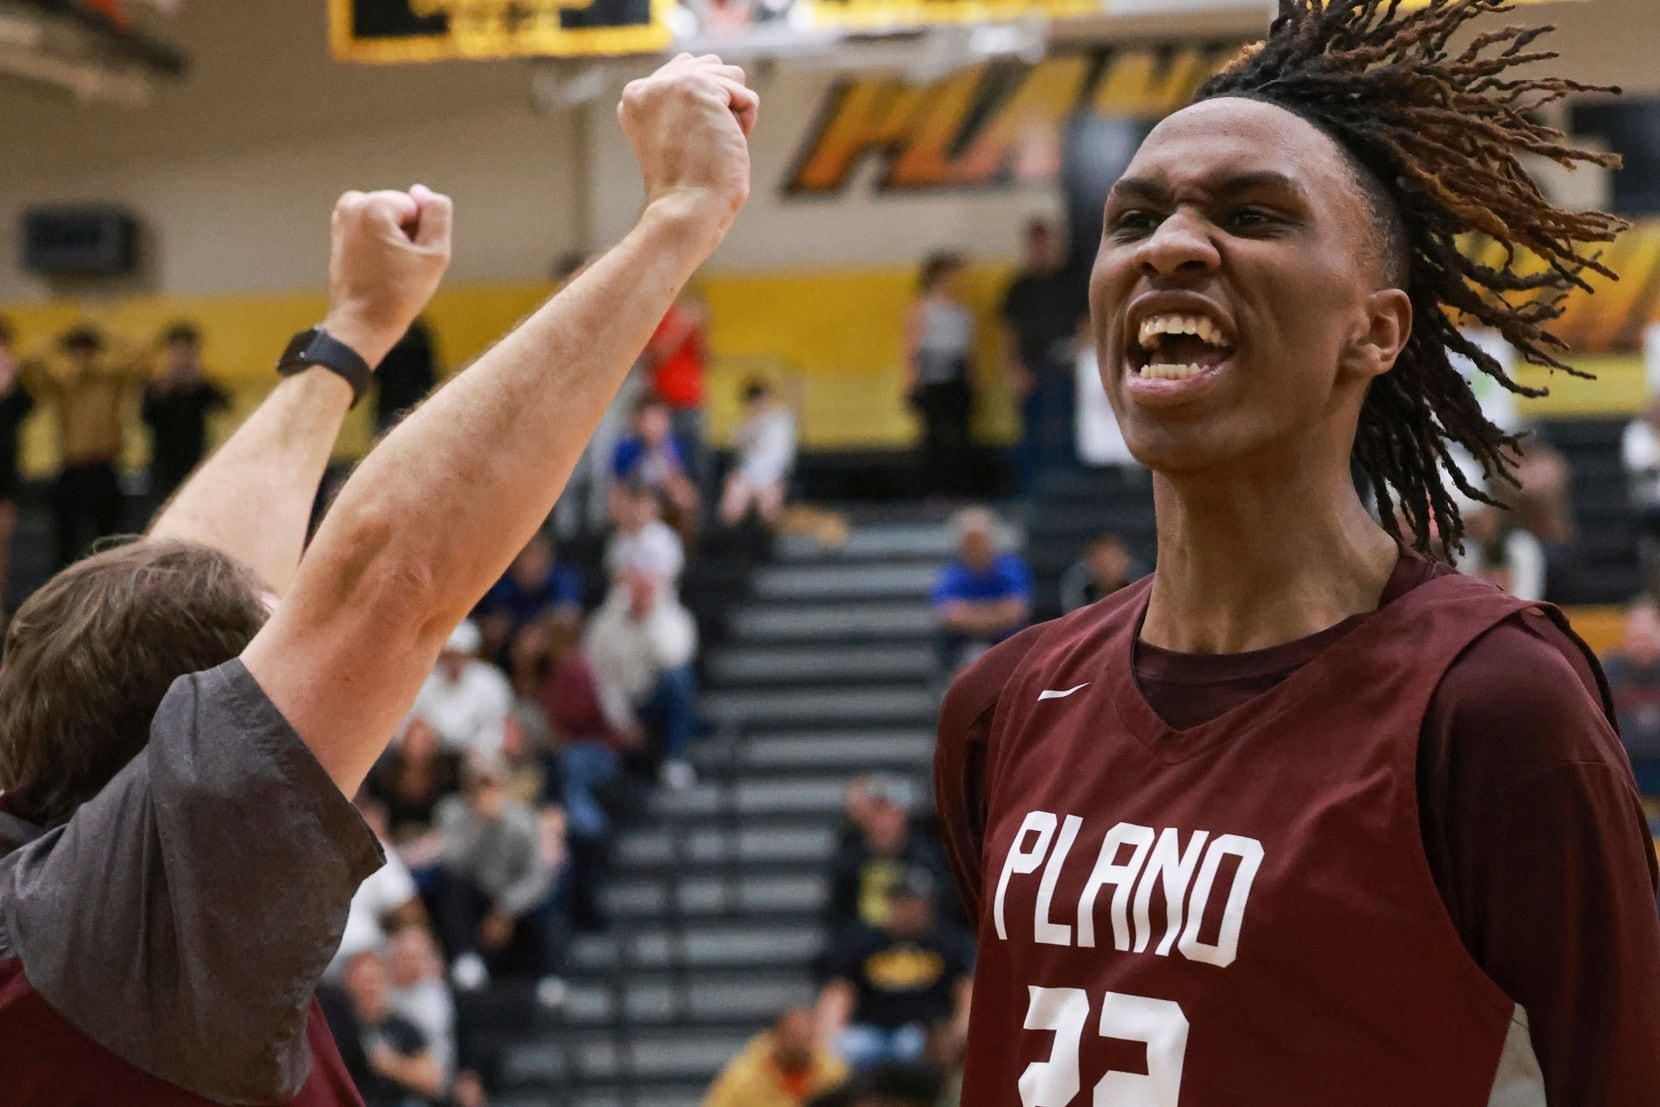 Basketball replay: Buzzer beaters elevate Plano boys and Hebron girls to  6-6A frontrunners